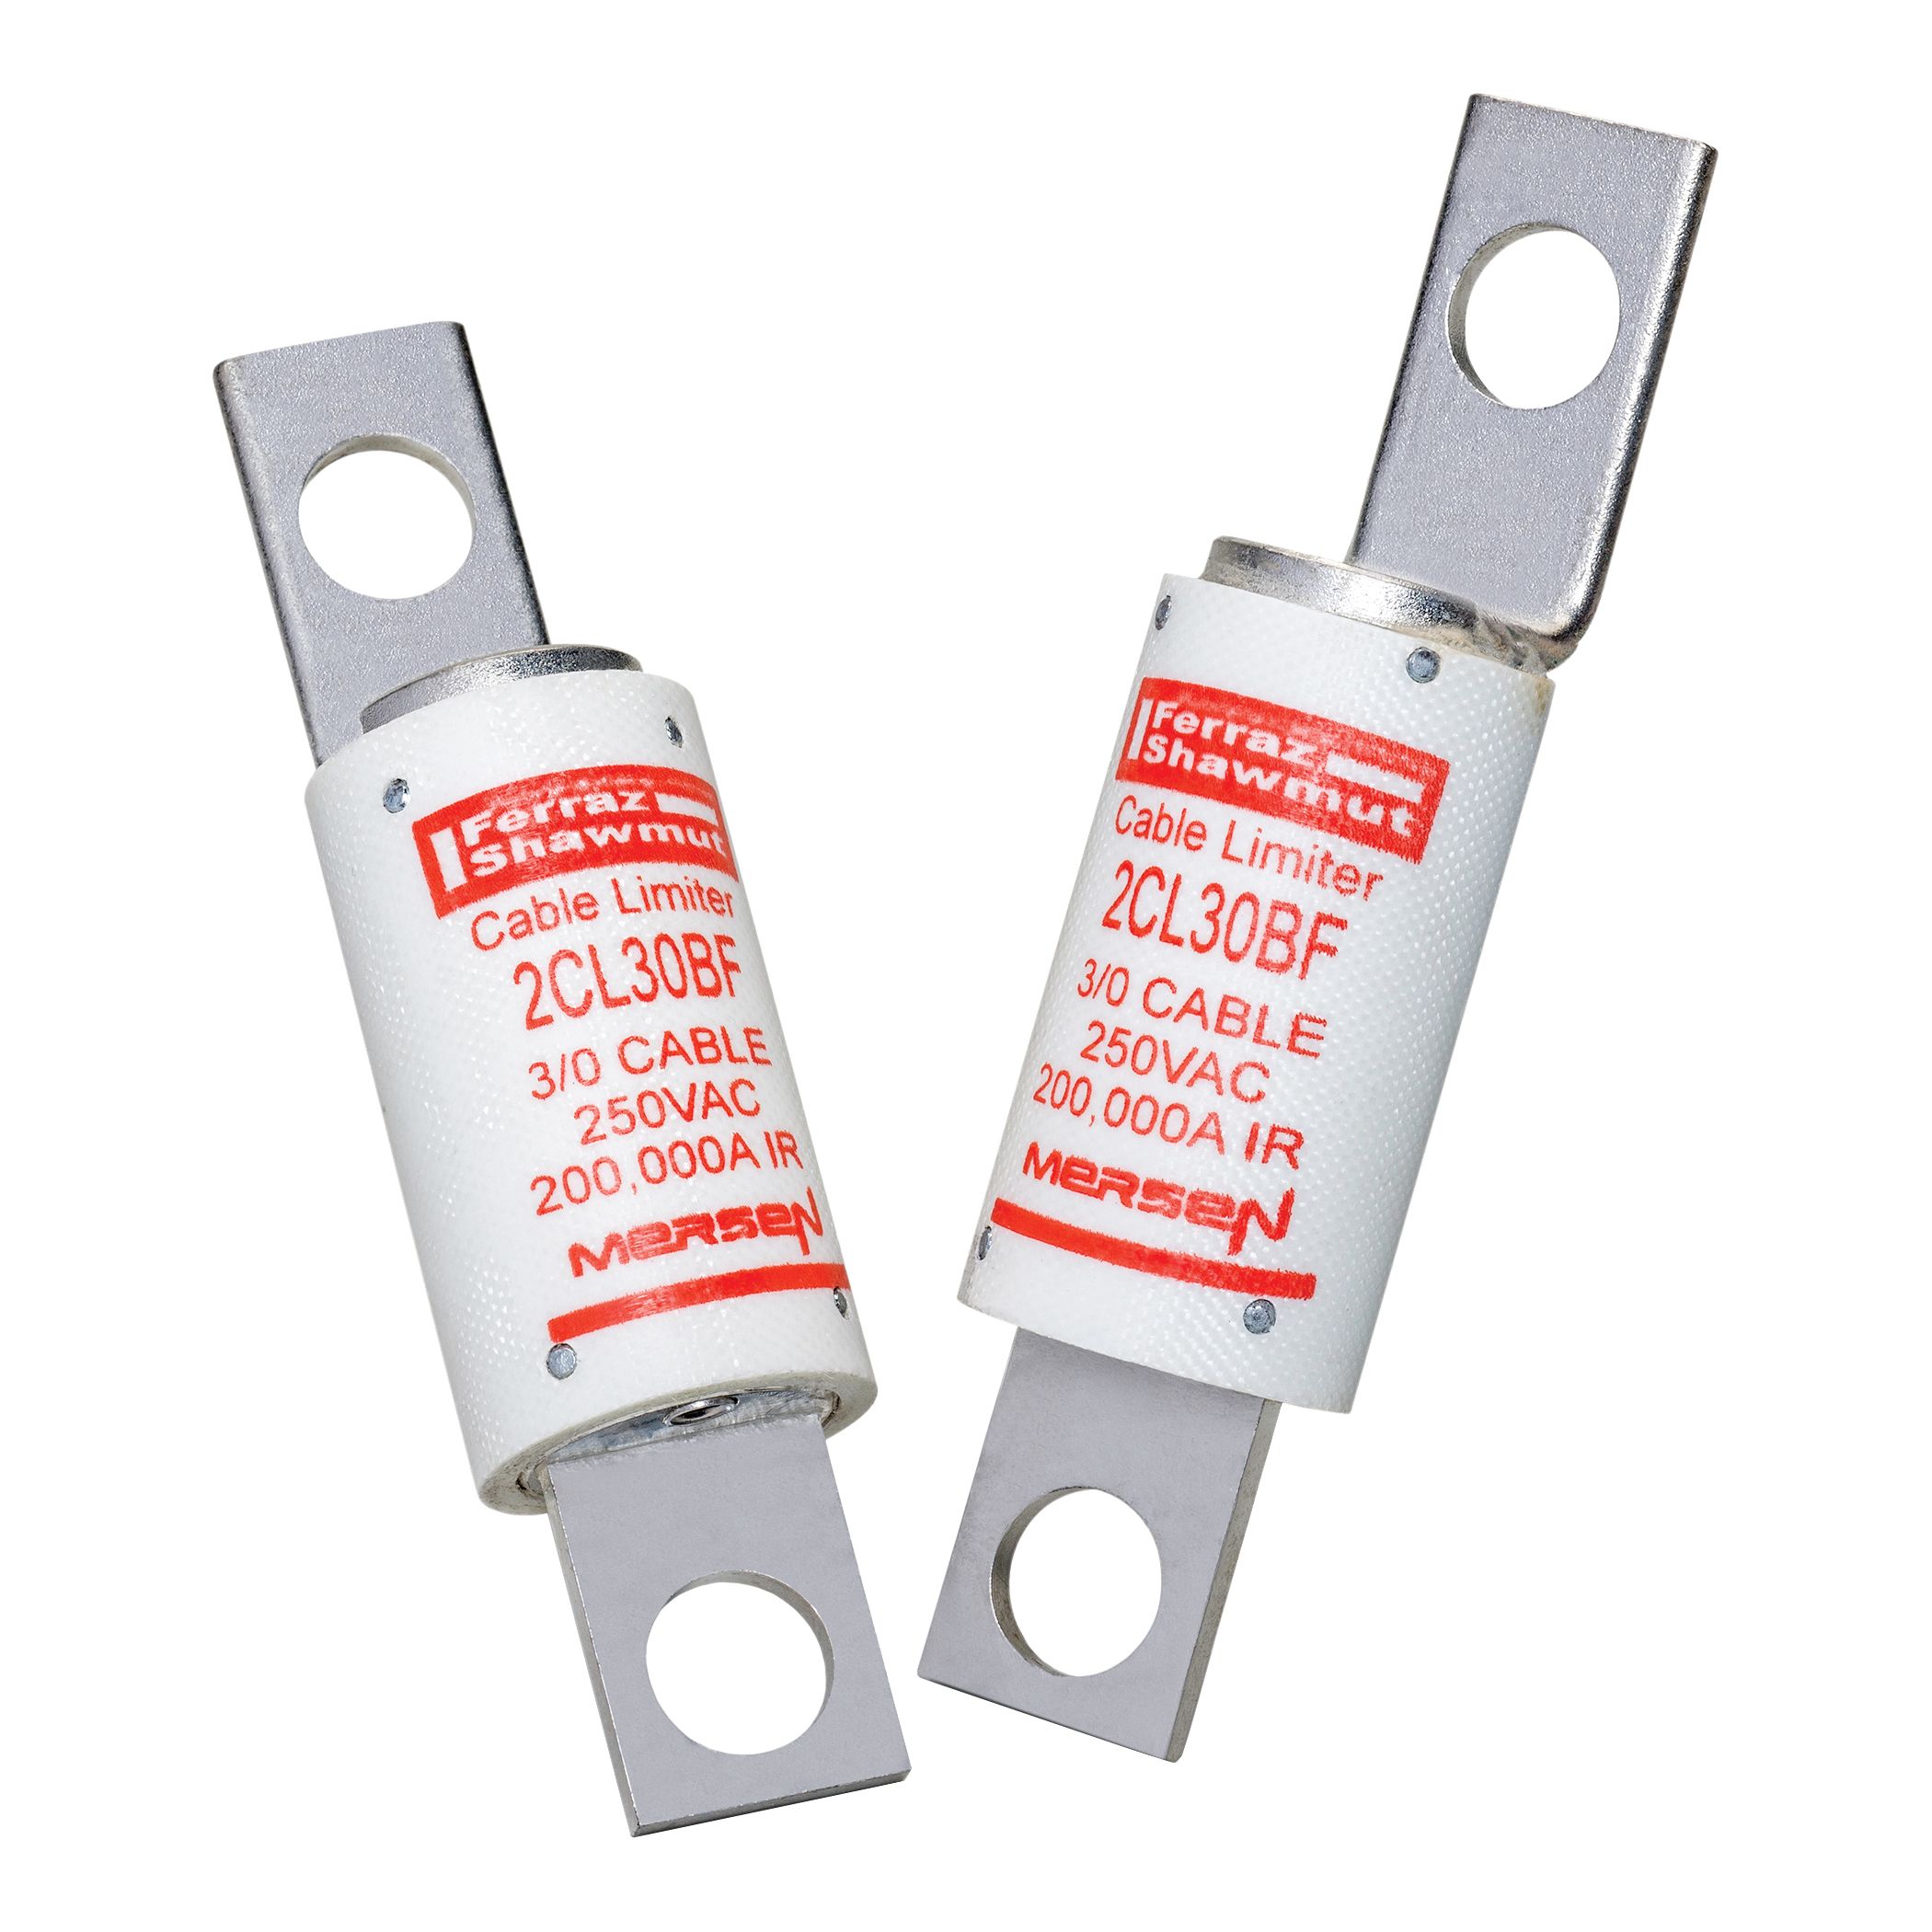 2CL40CF - Cable Protector Fuse 250V 4/0 Cable To Offset Bus Mount 2CL Series